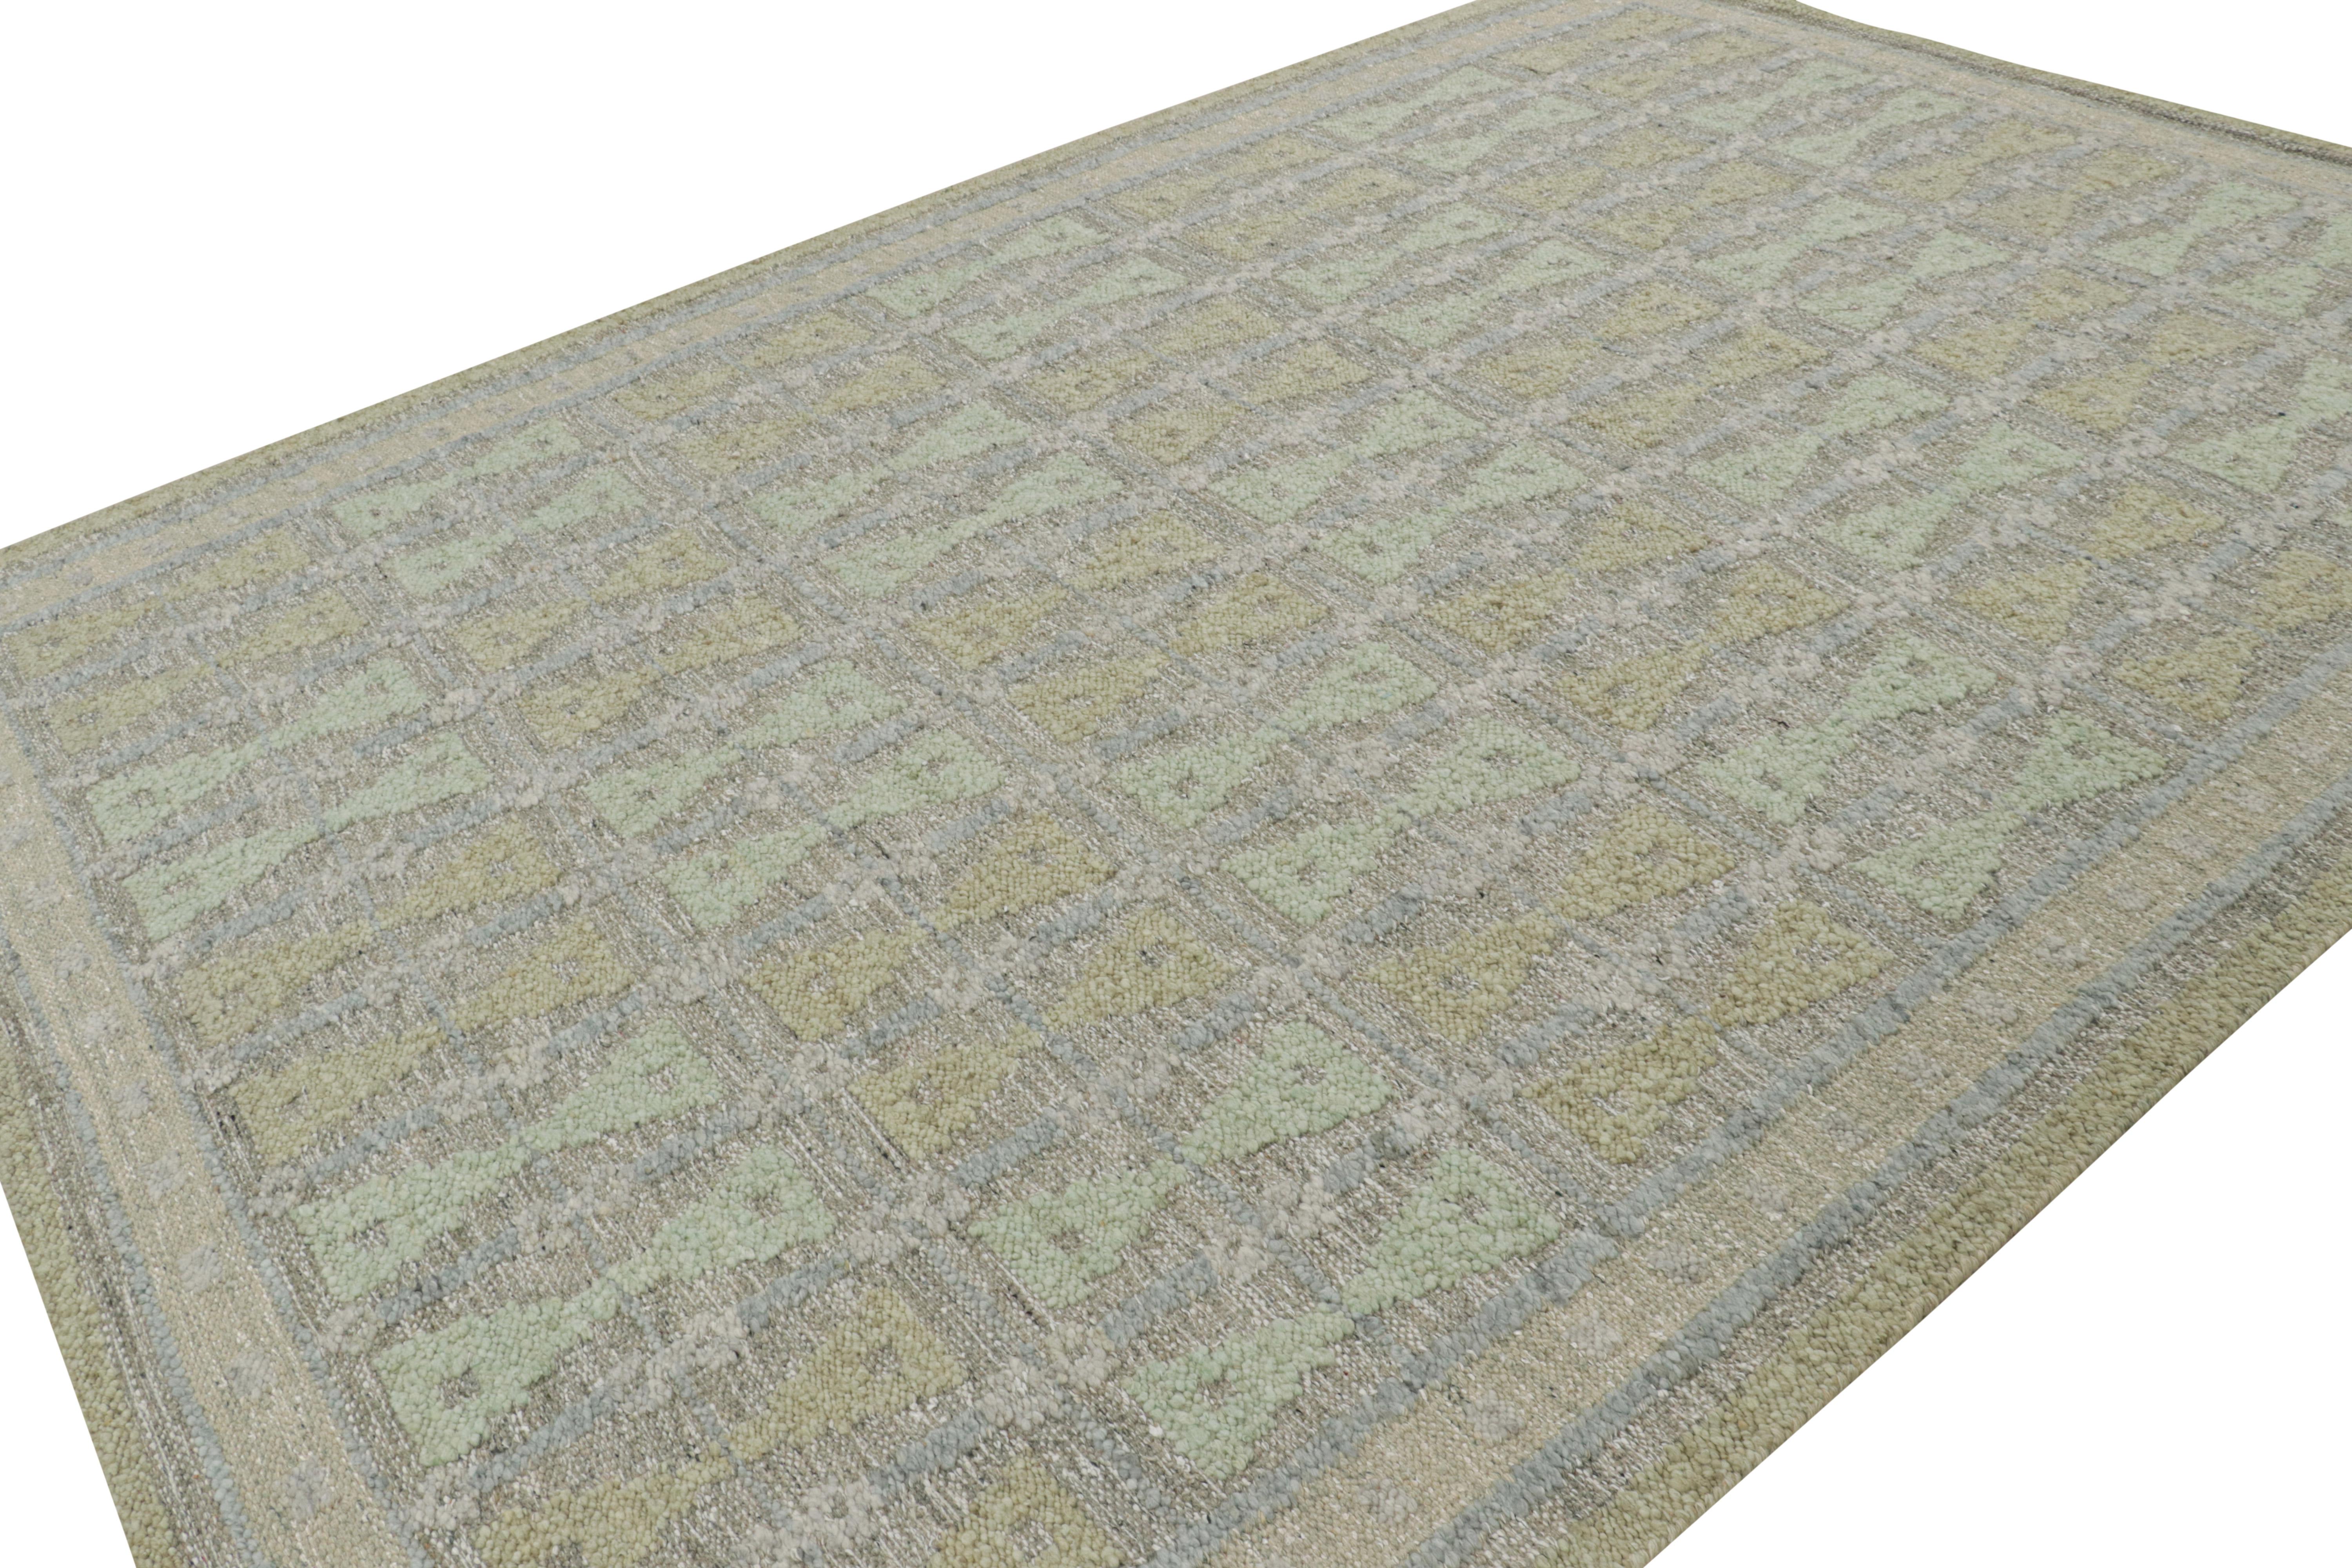 Indian Rug & Kilim’s Scandinavian Style Rug with Hourglass Patterns in Tones of Green For Sale